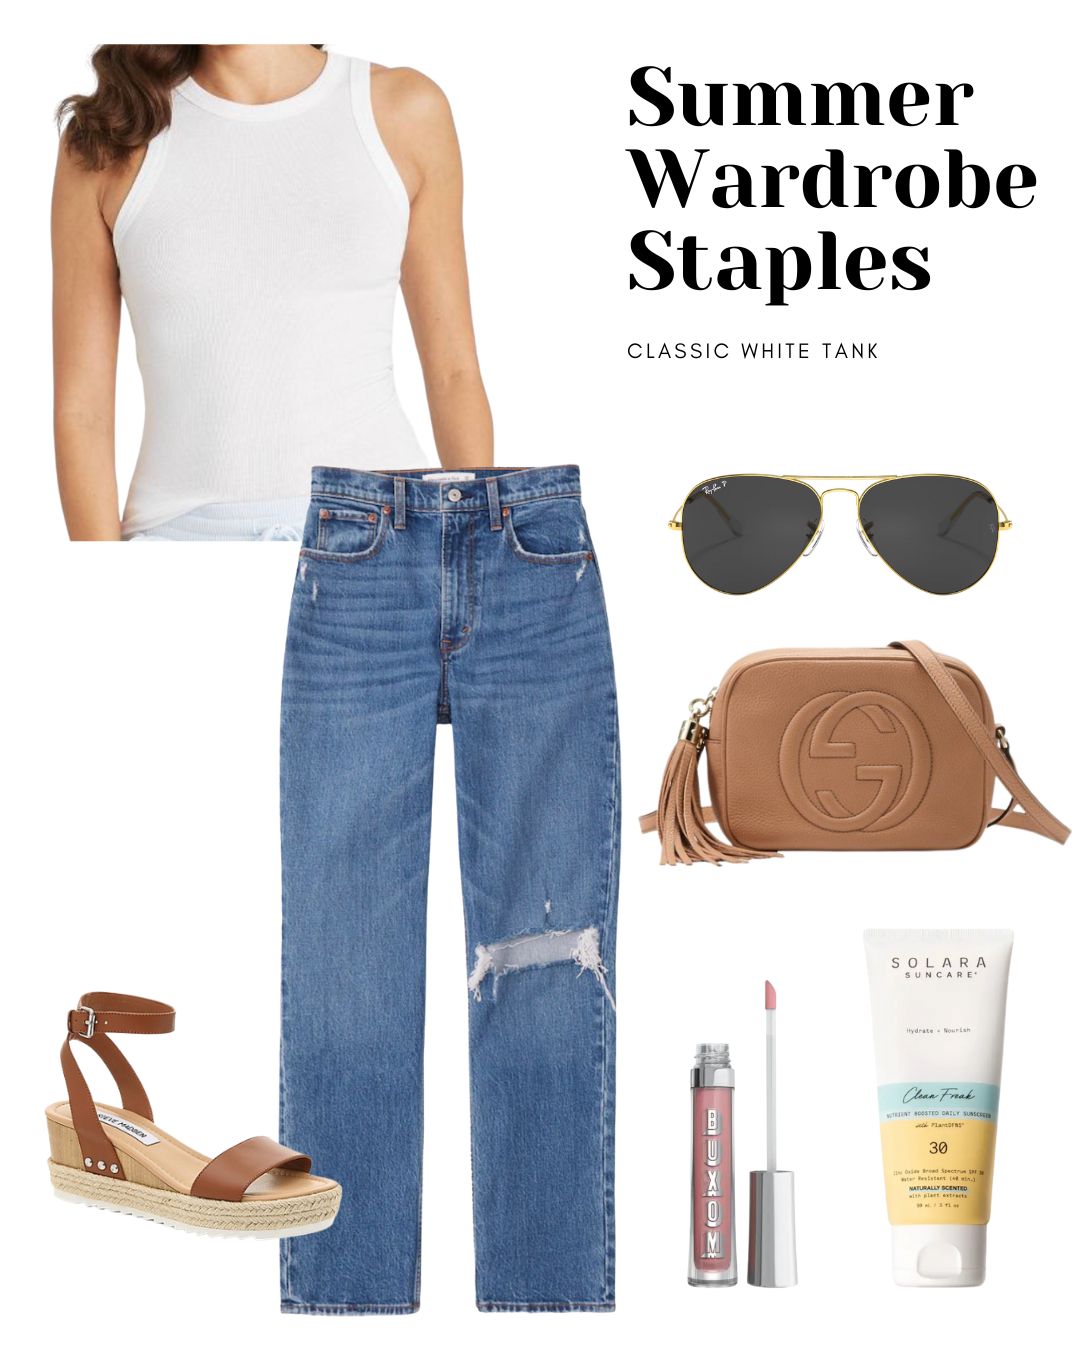 10 Outfit Ideas for Summer With Must-Have Wardrobe Staples - Linn